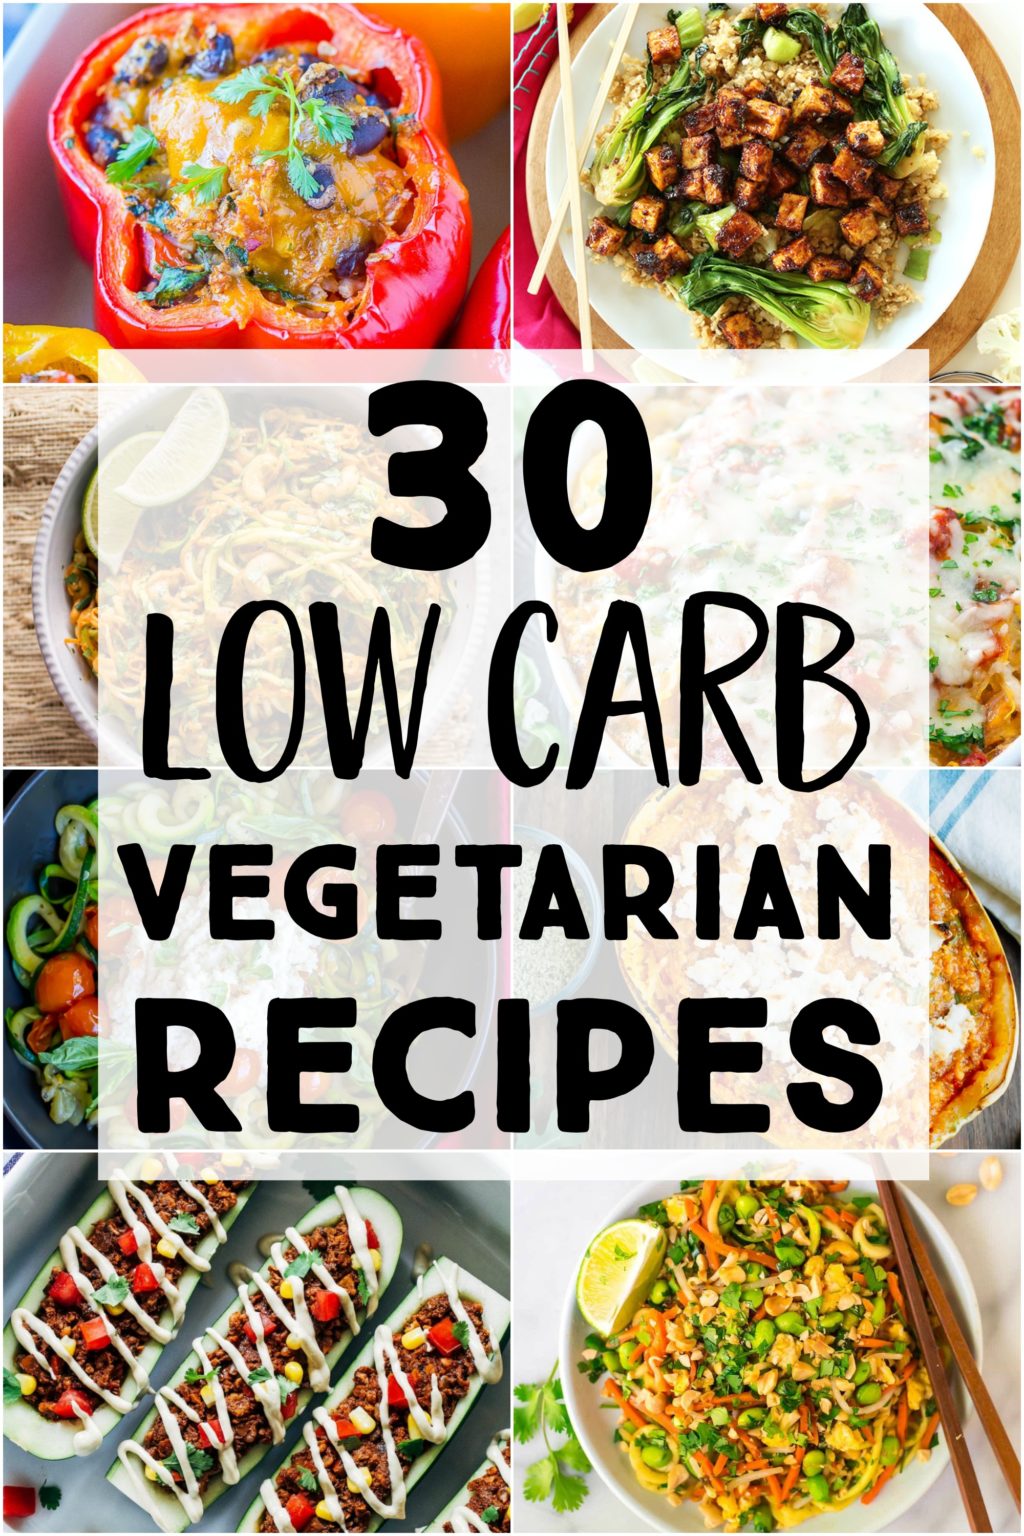 30 Delicous Low Carb Vegetarian Recipes - She Likes Food